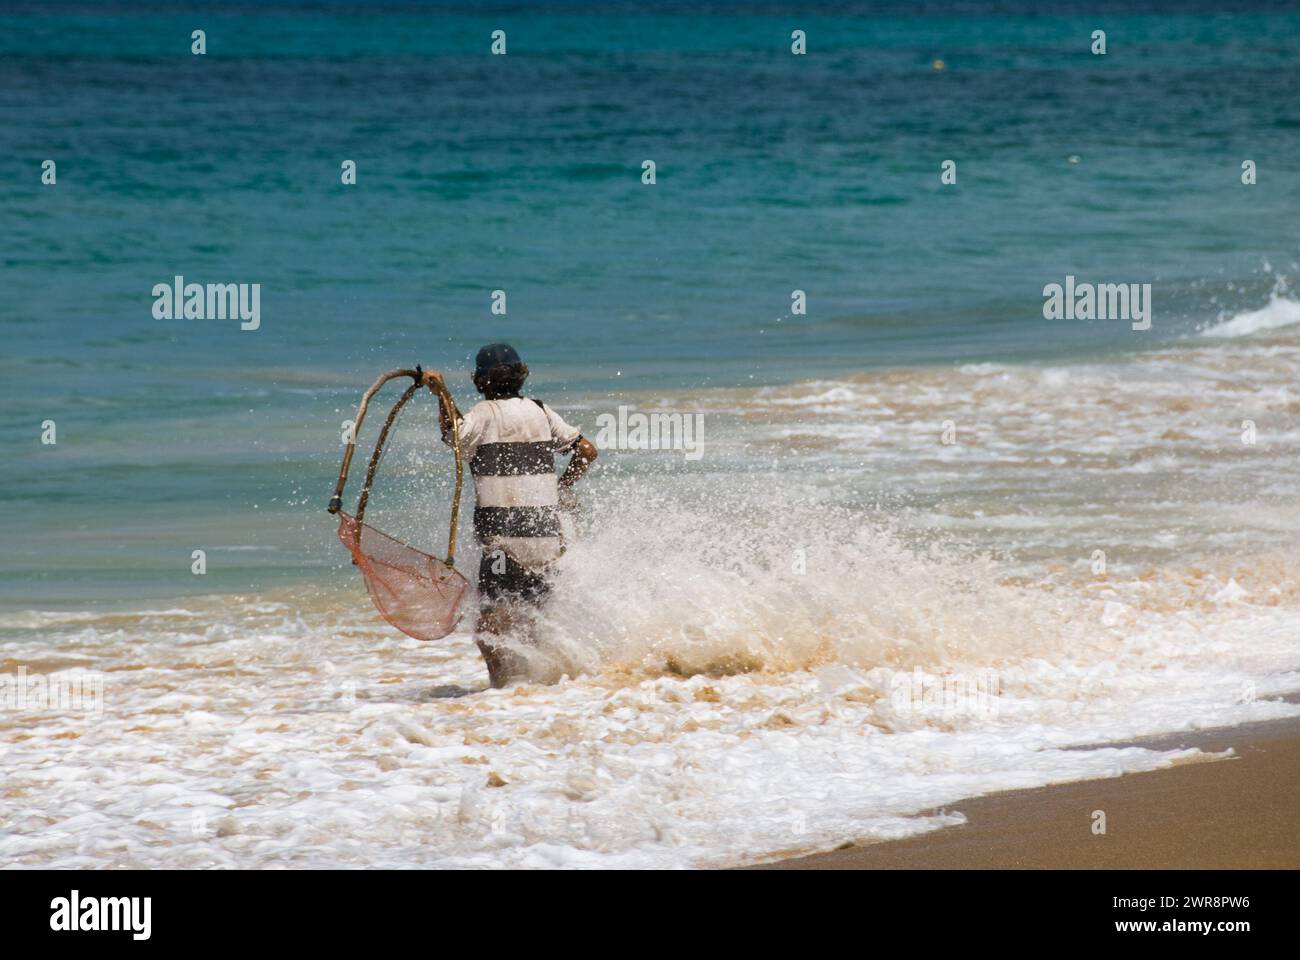 A man with a surfboard and harness entering the ocean Stock Photo